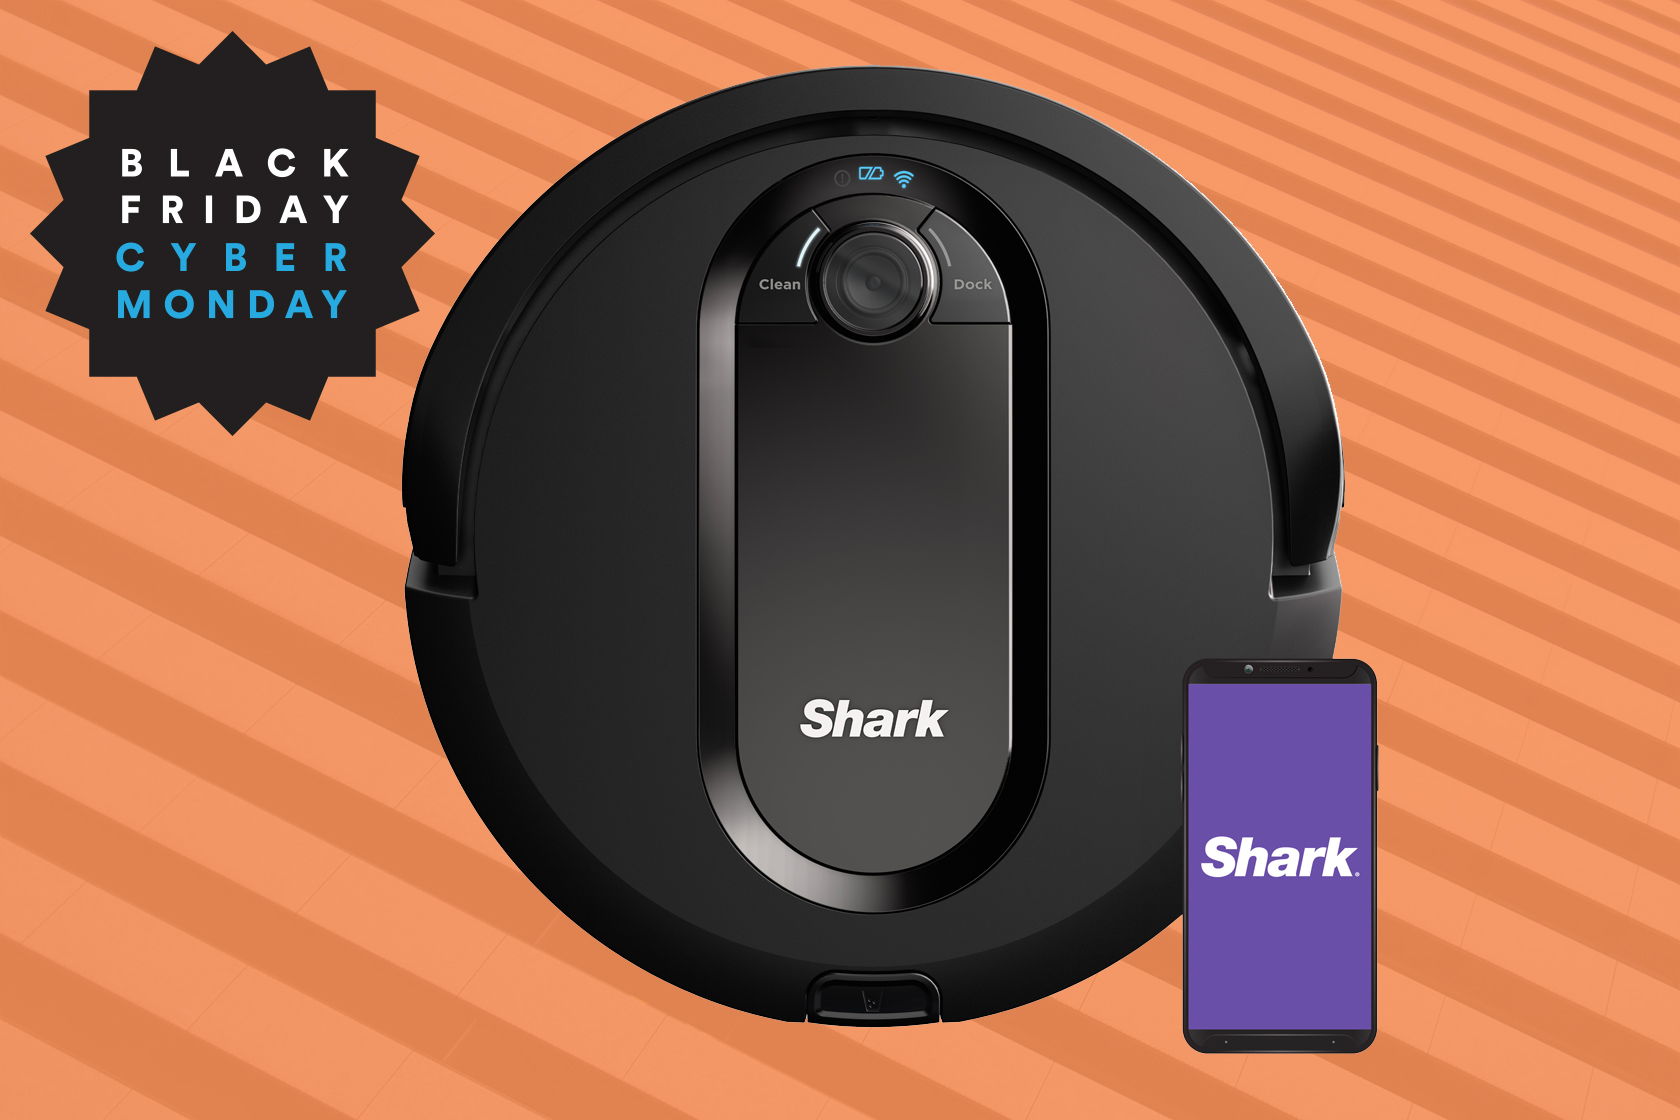 Save 100 On A Shark Iq Robot Vacuum And Usher In The Robot Apocalypse